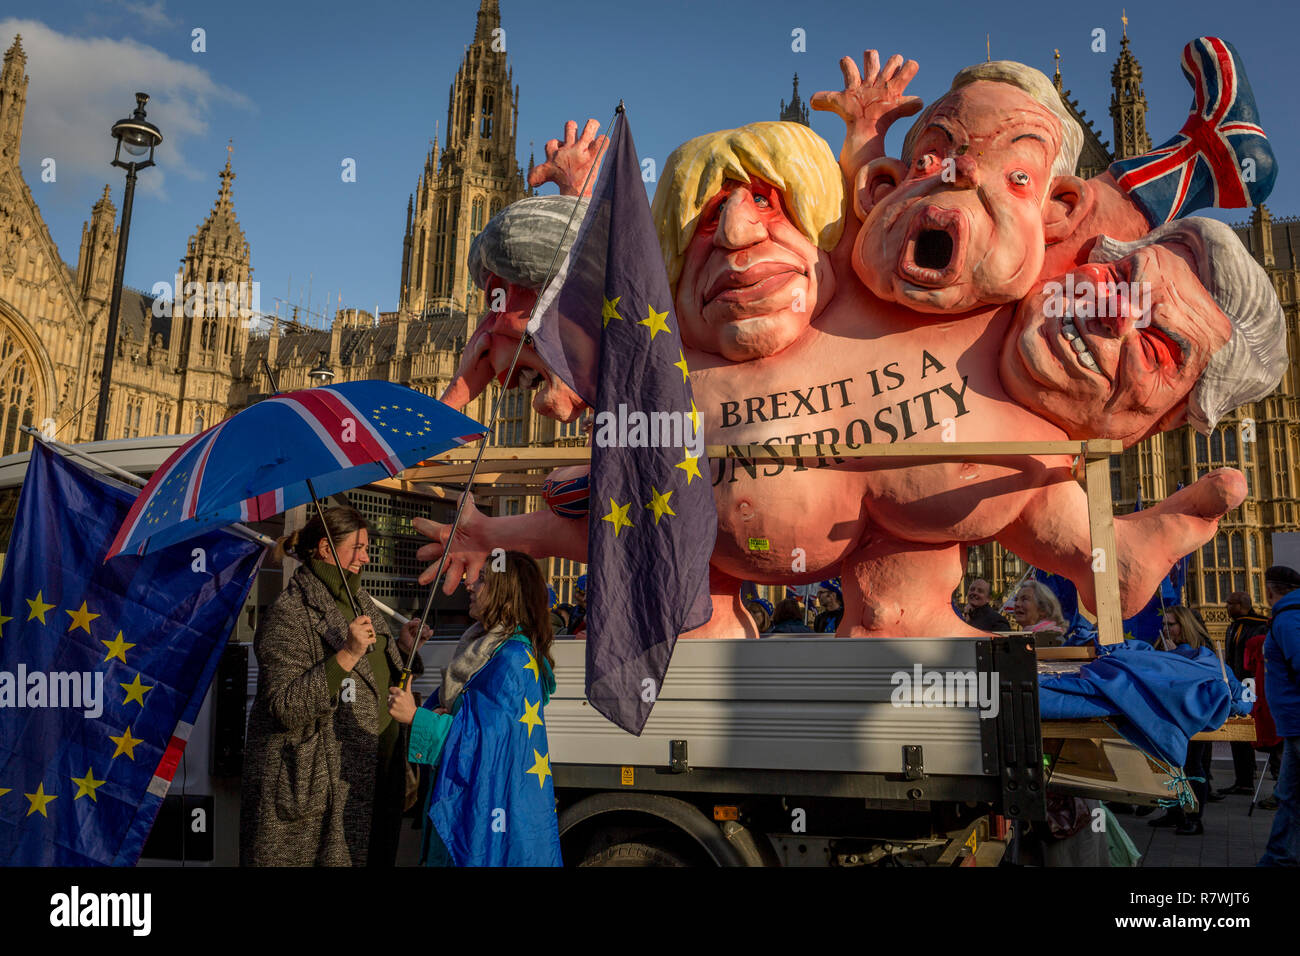 London, UK 11th December 2018: As Prime Minister Theresa May tours European capitals hoping to persuade foreign leaders to accept a new Brexit deal (following her cancellation of a Parliamentary vote), pro-EU Remainers protest with satirical figures of Theresa May, Boris Johnson, Michael Gove and David Davies, opposite the Houses of Parliament, on 11th December 2018, in London, England. Photo by Richard Baker / Alamy Live News Stock Photo